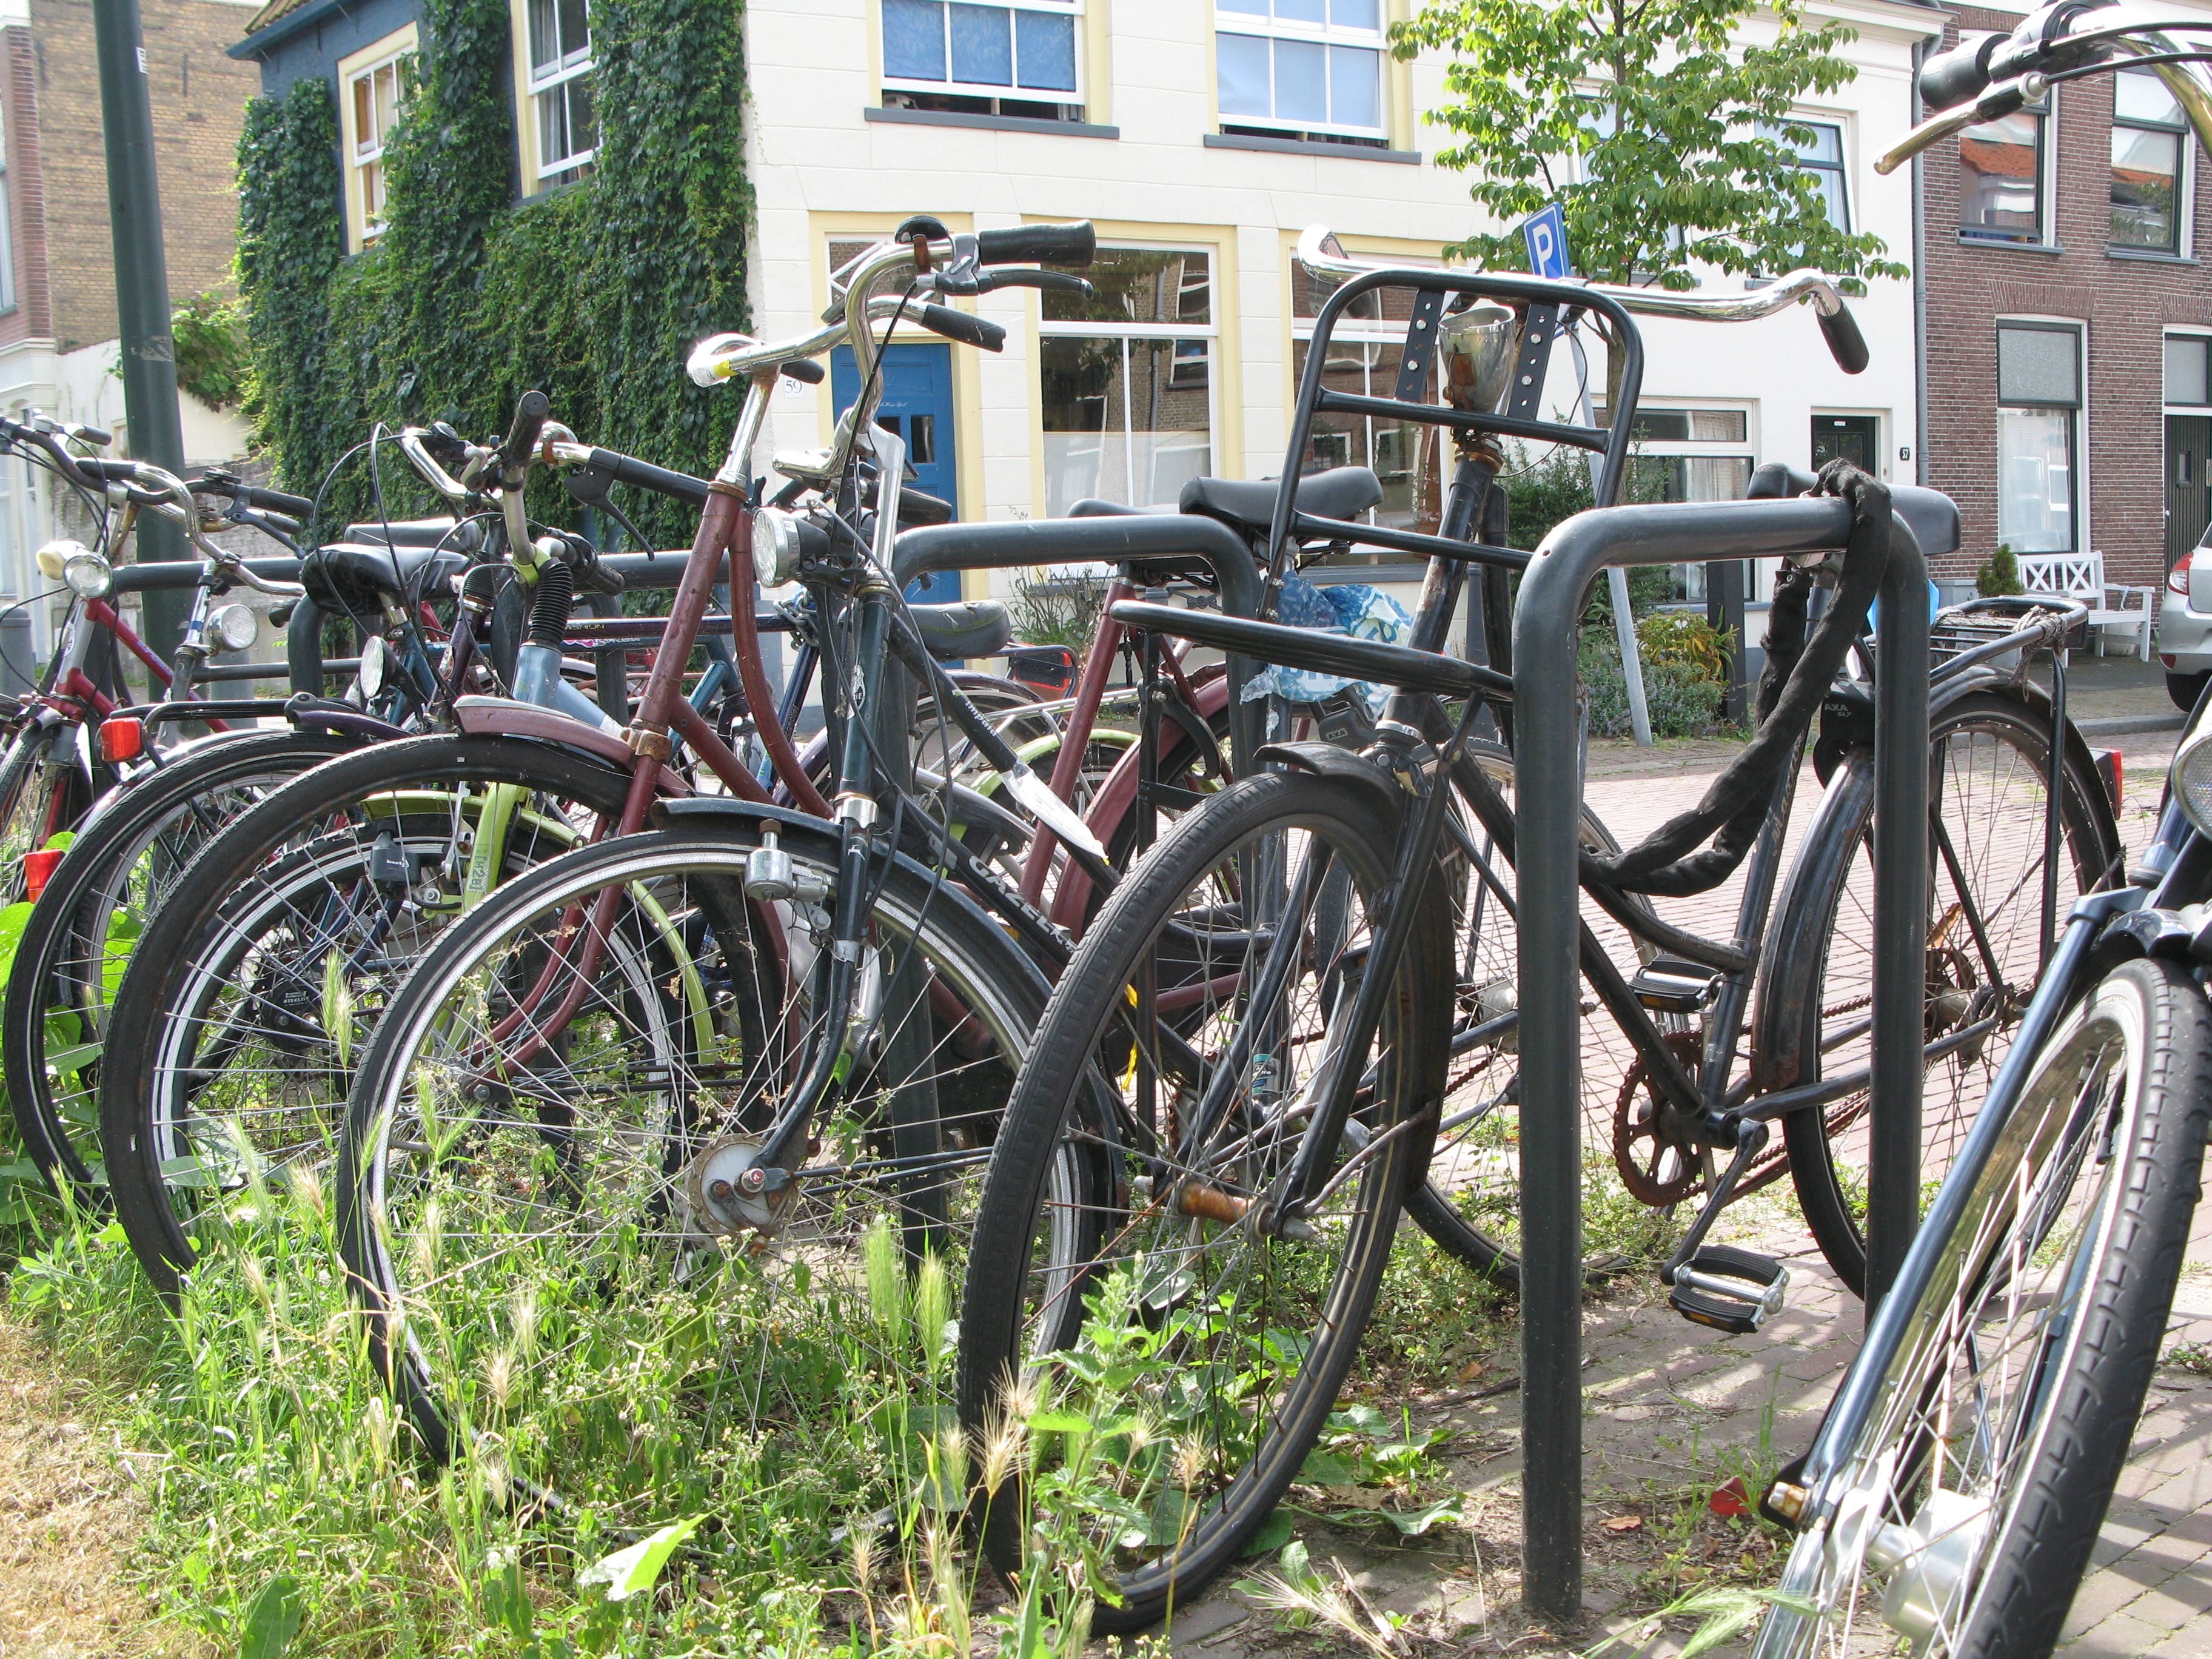 Some of the bikes in Delft